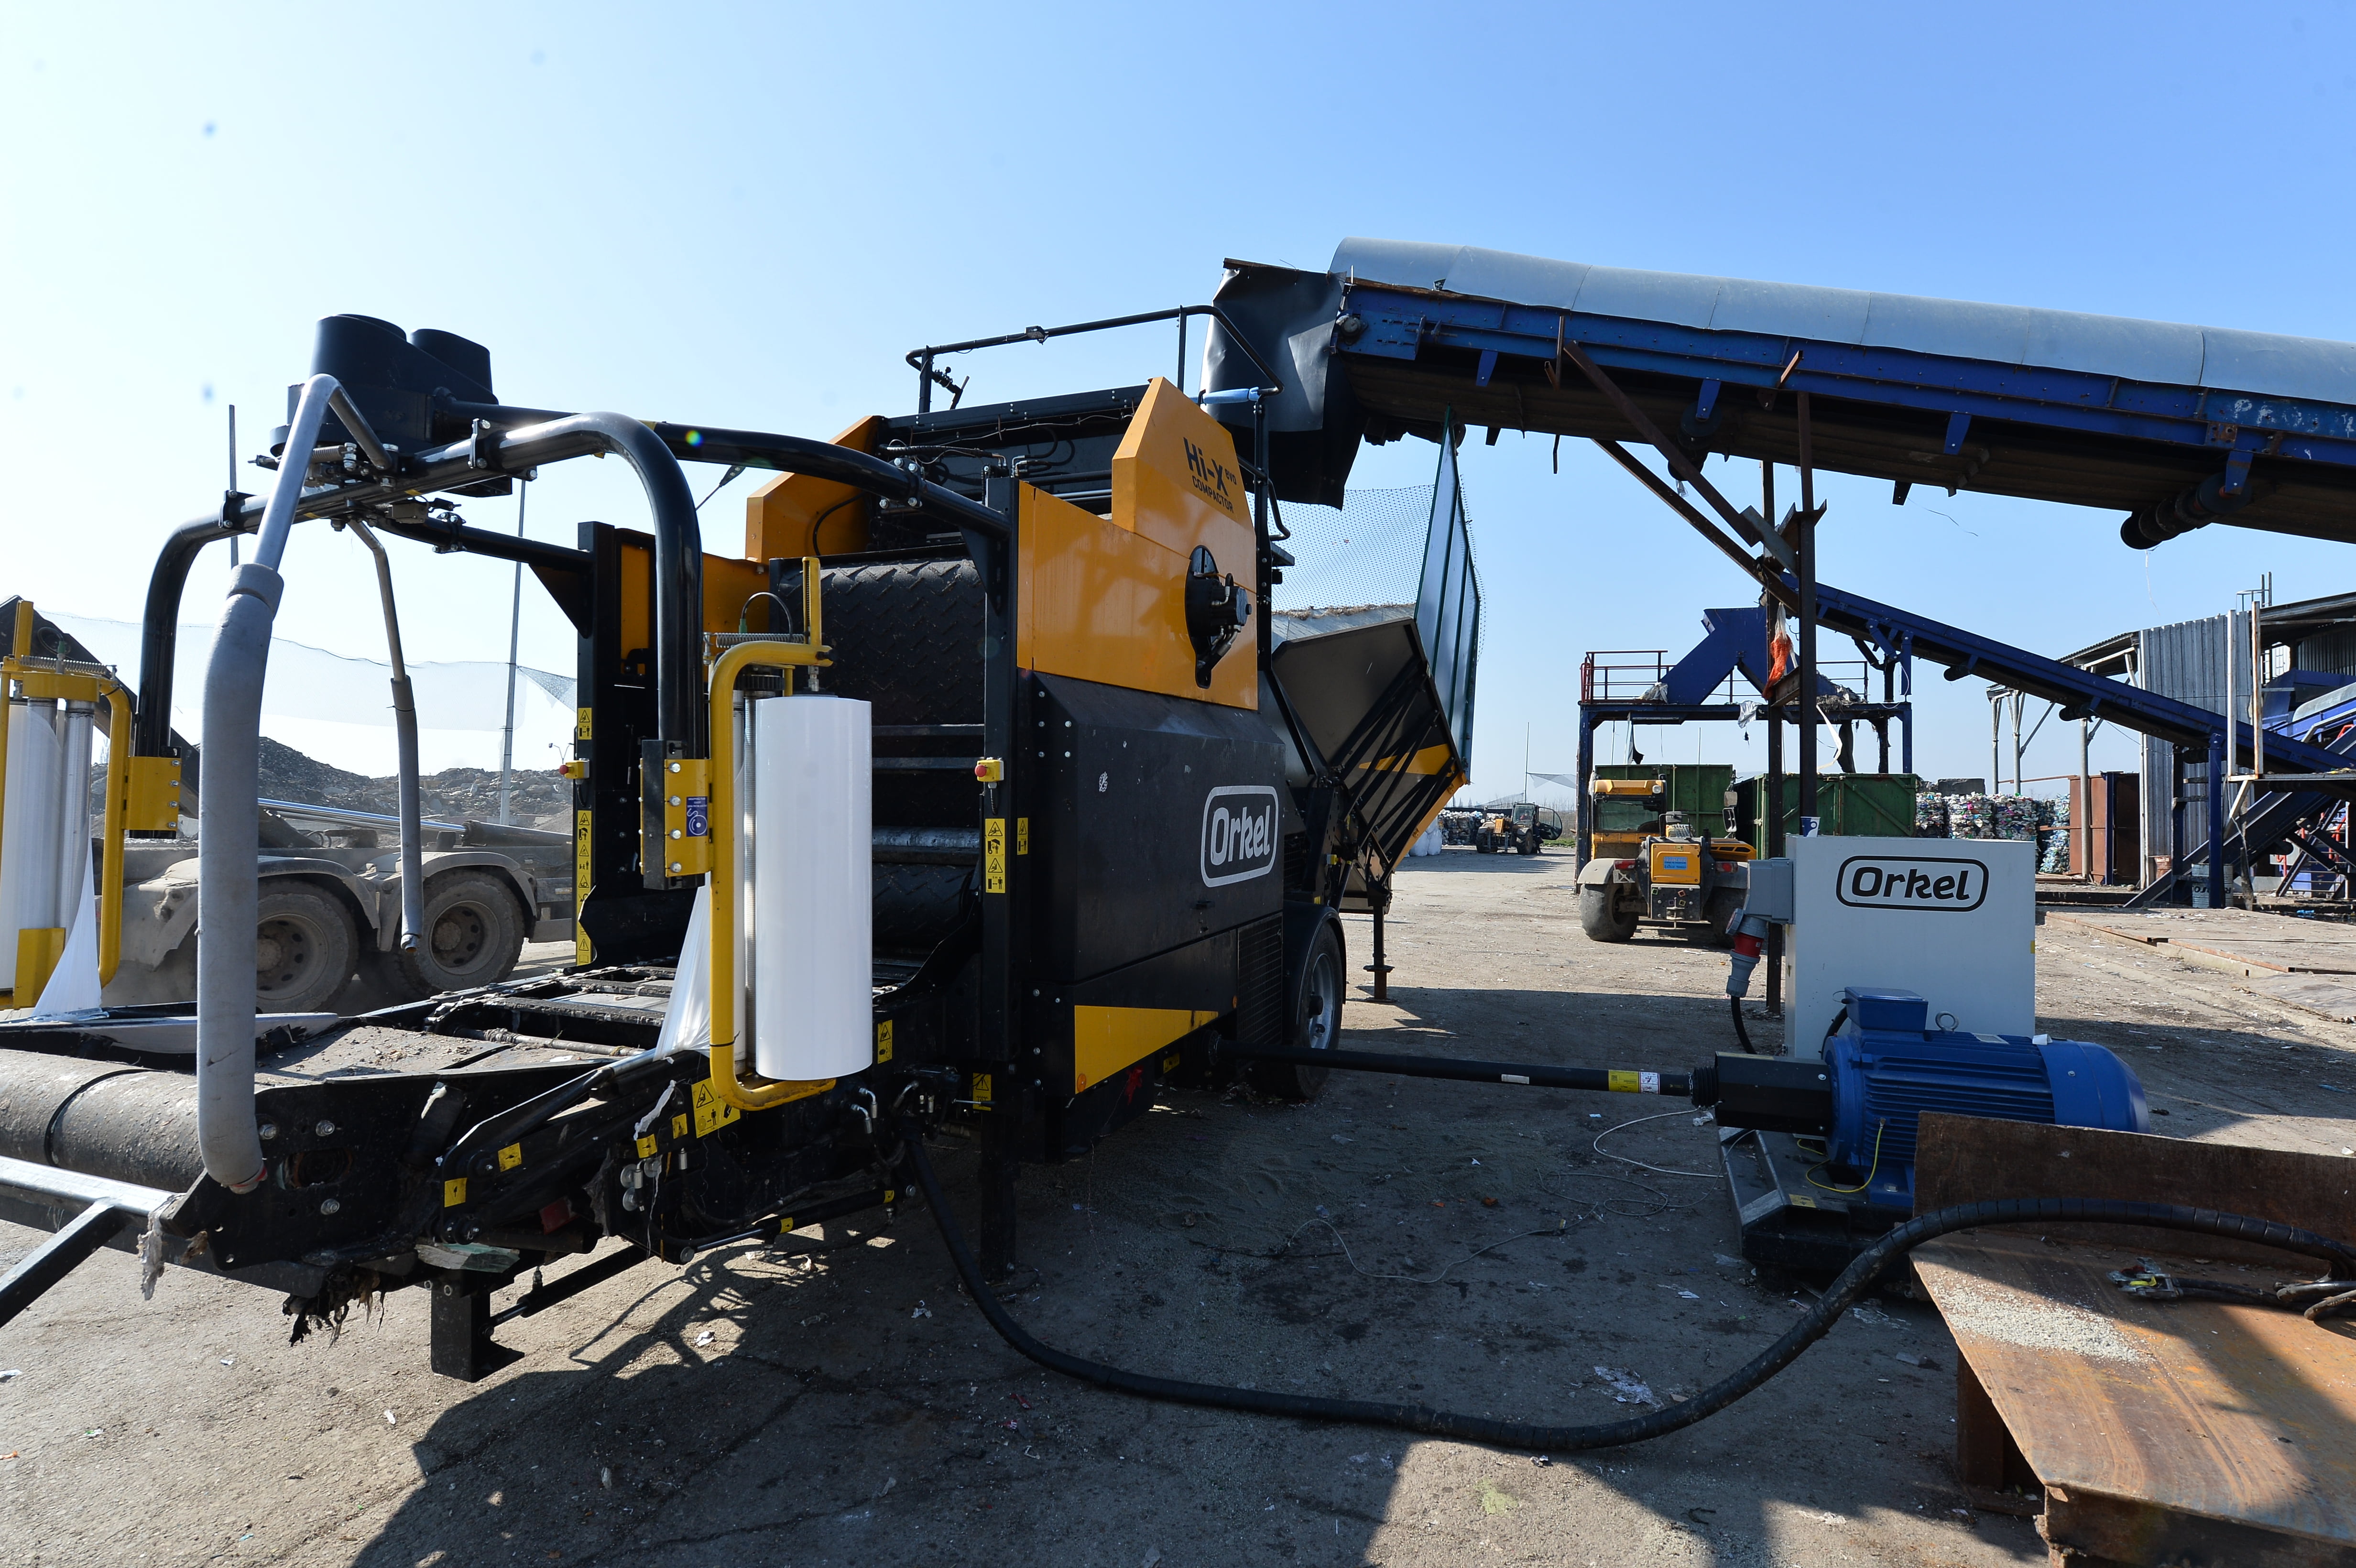 Waste management with Orkel: A Hi-X evo compactor in an industrial location under a blue sky